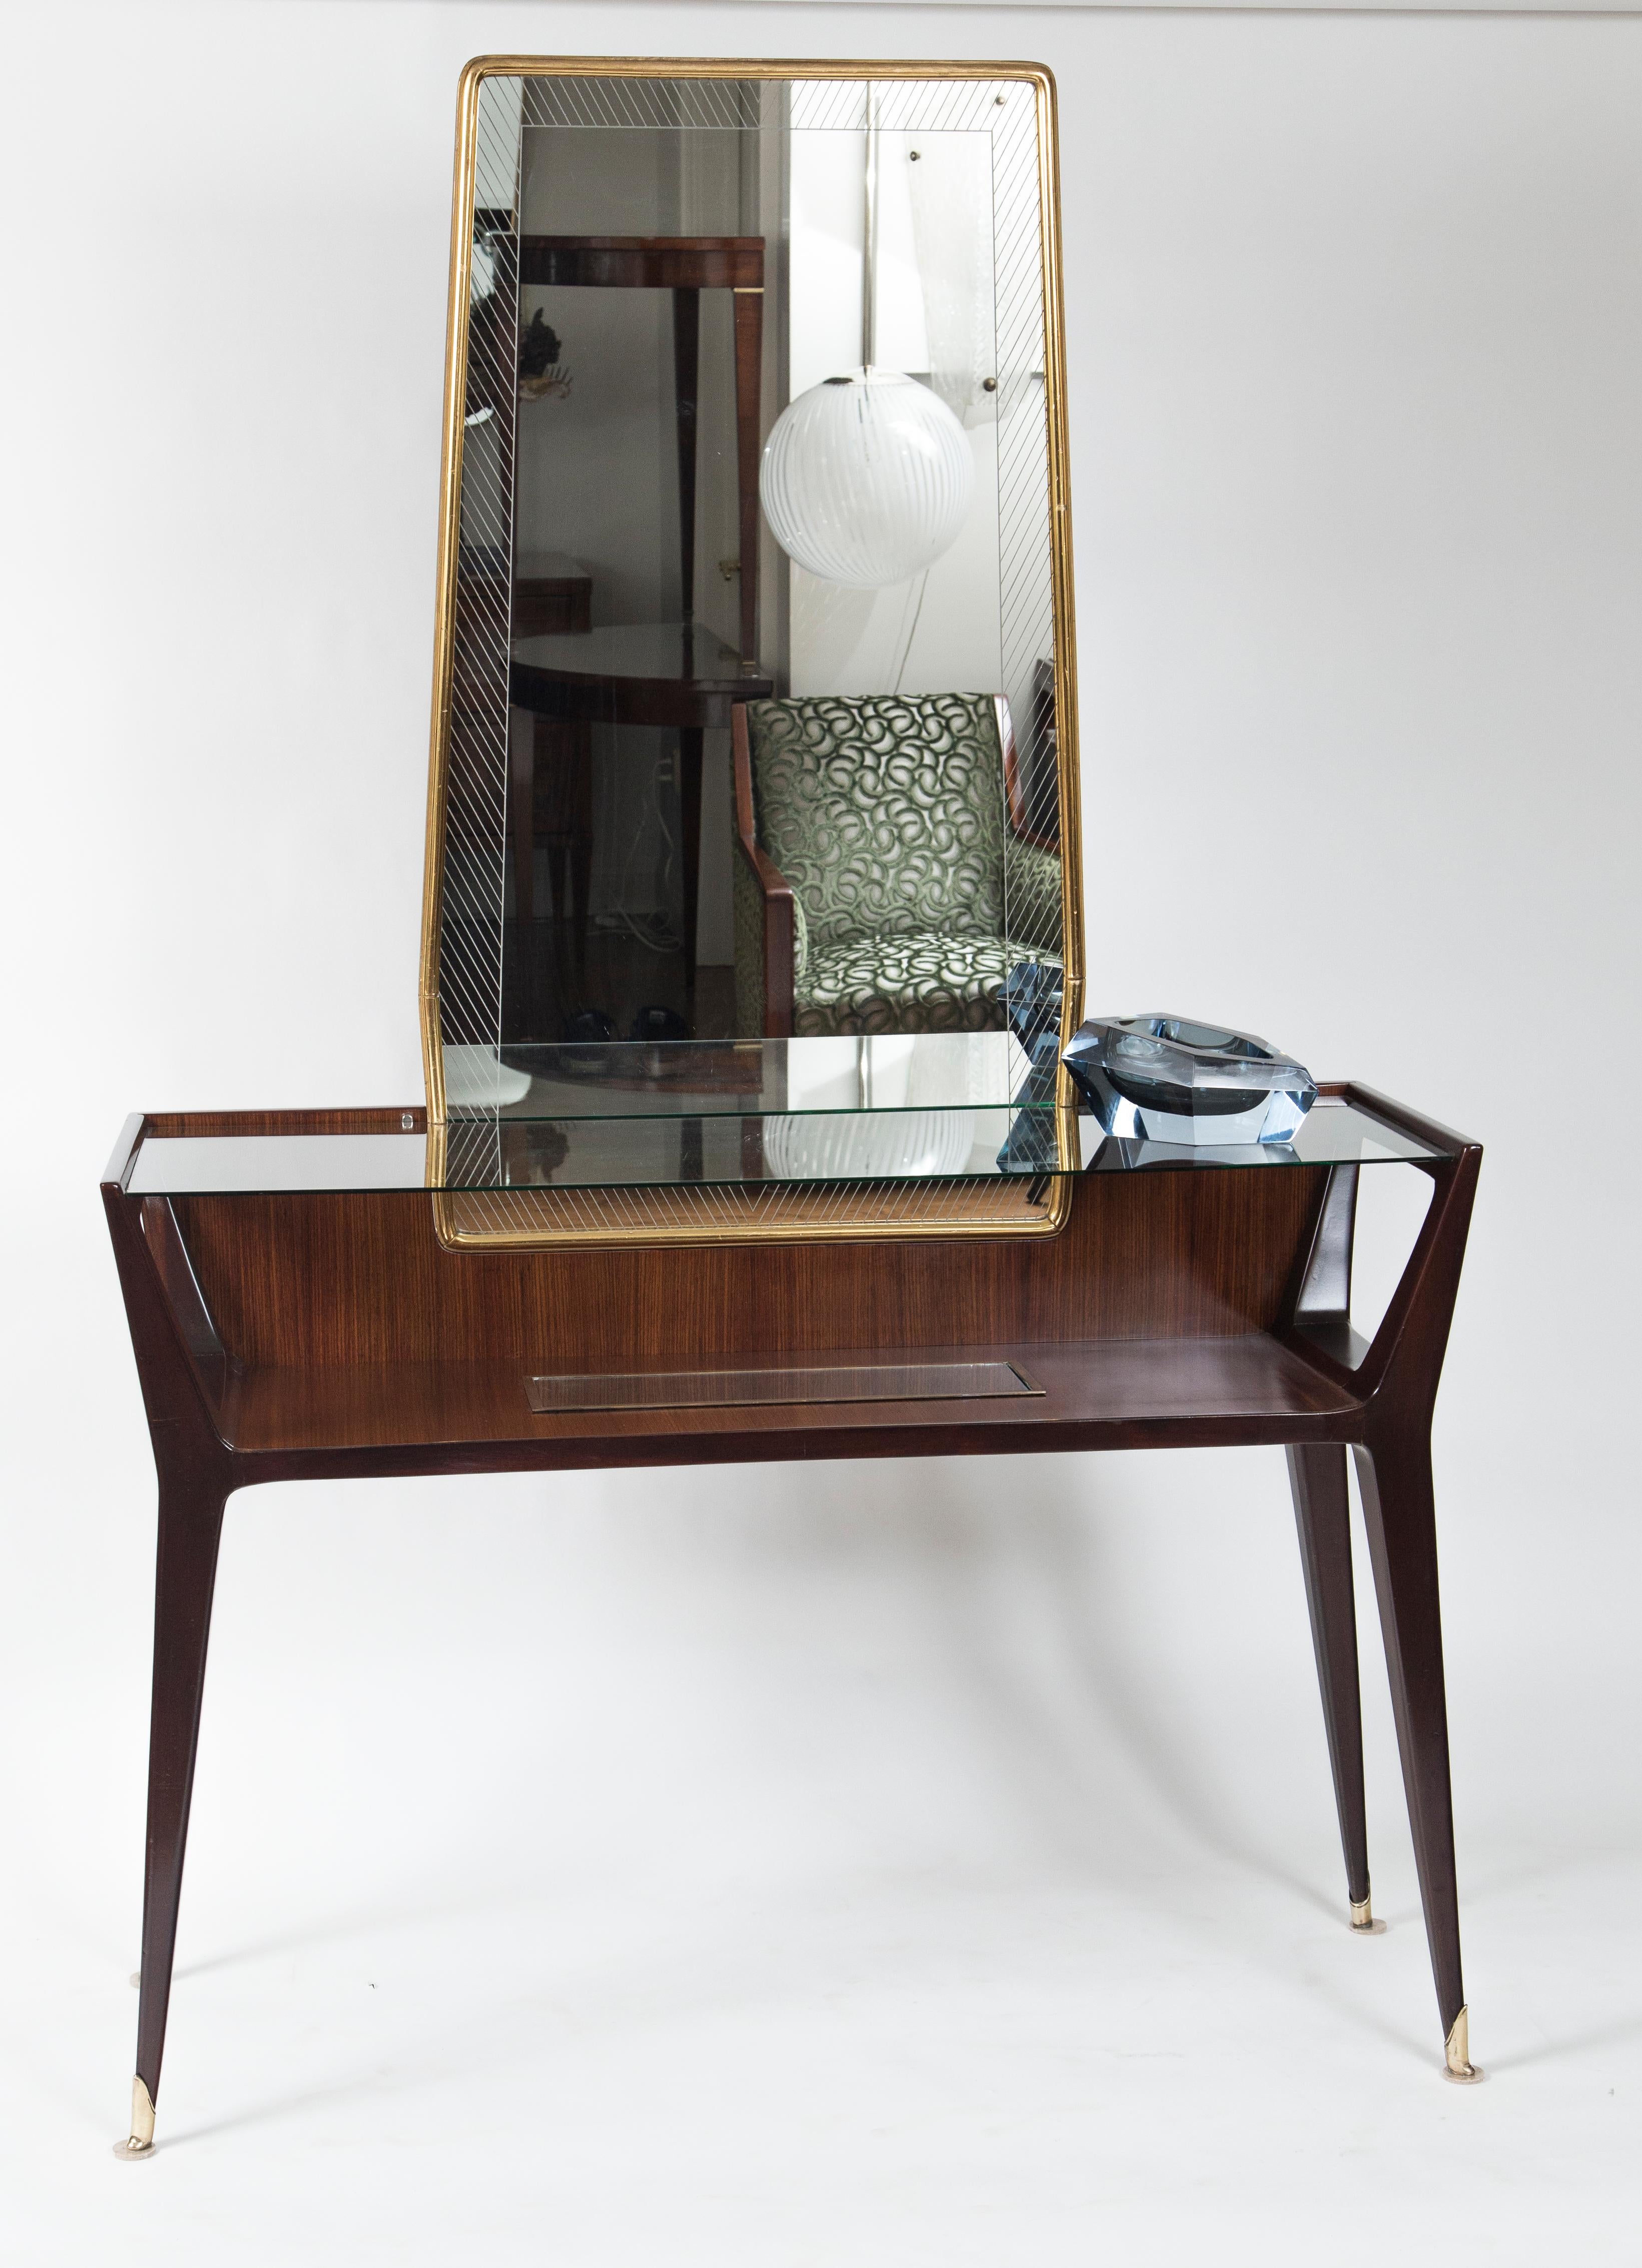 Wonderful floating glass top rosewood console table with a glass encased shelf below finishing on angular legs with bronze sabots and above a detachable angular gilt mirror. Console looks great without mirror as well.
Origin: Italy
Manufacturer La